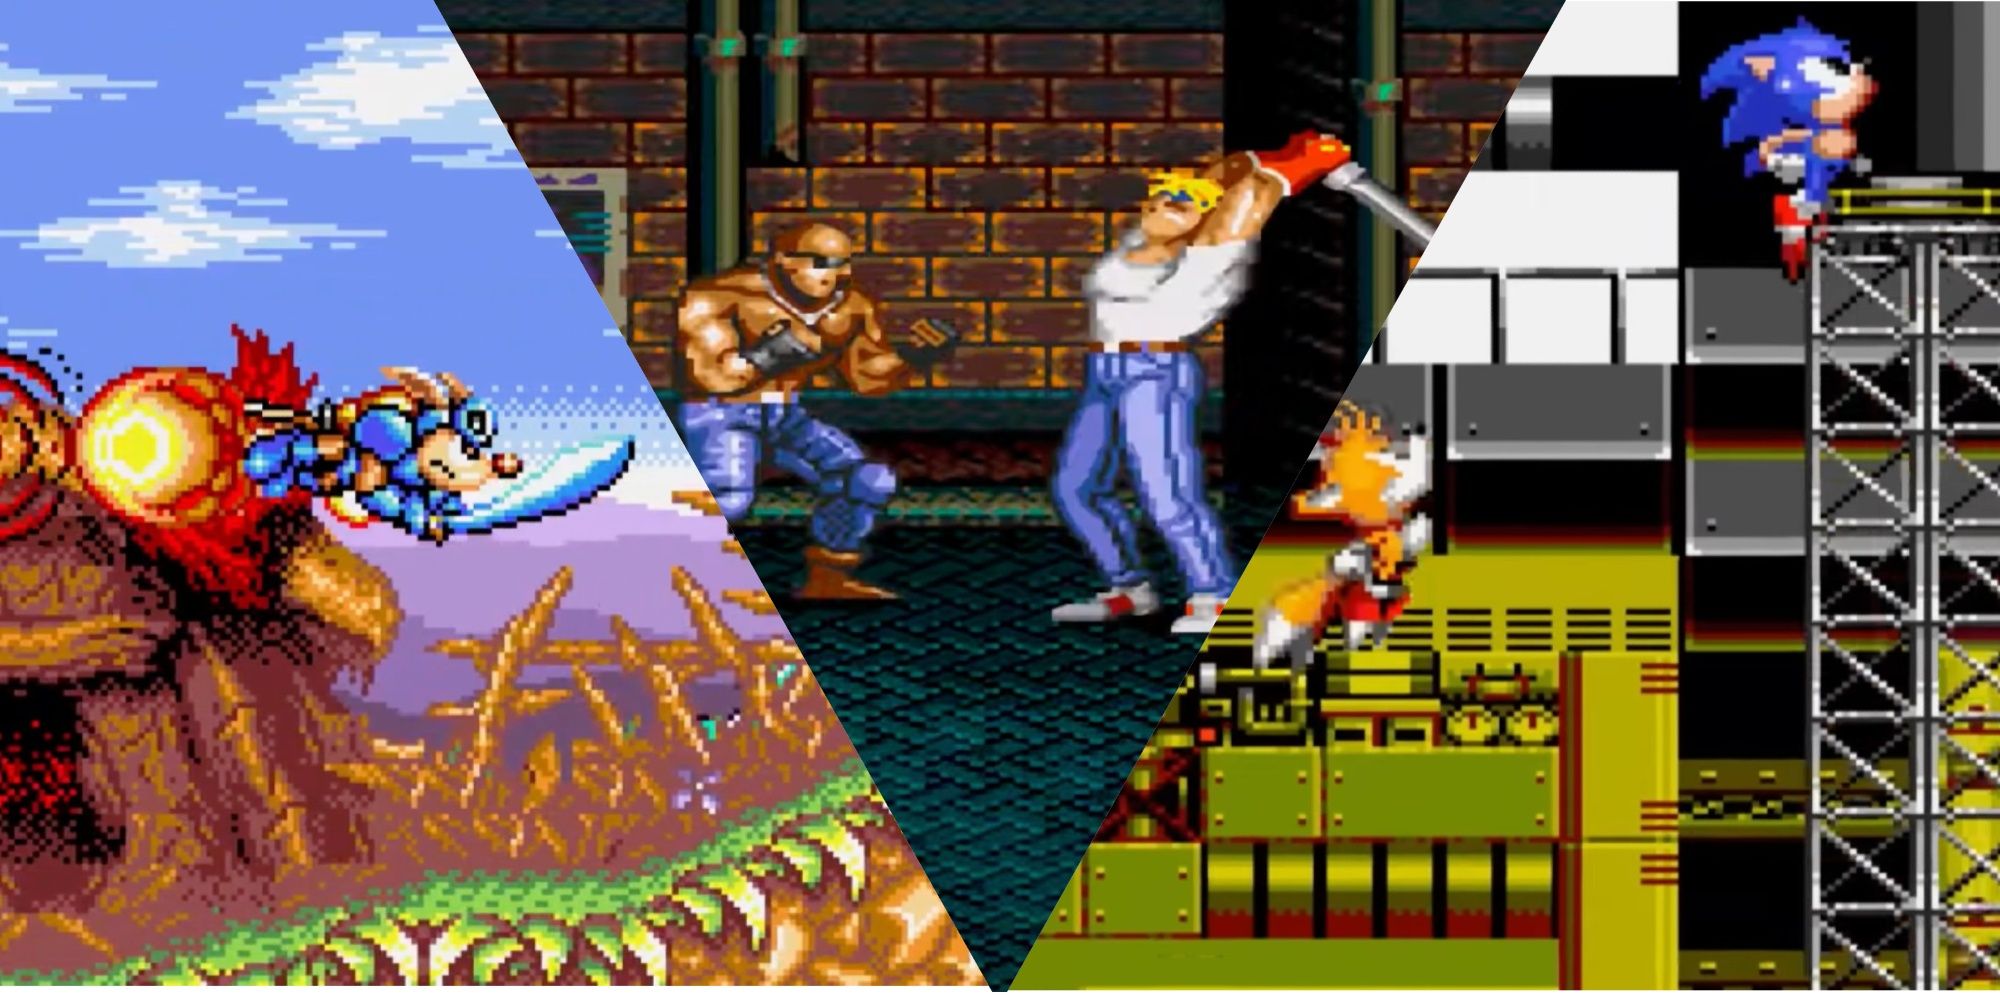 Collage image of Rocket Knight Adventures, Streets of Rage 2, and Sonic the Hedgehog 2.